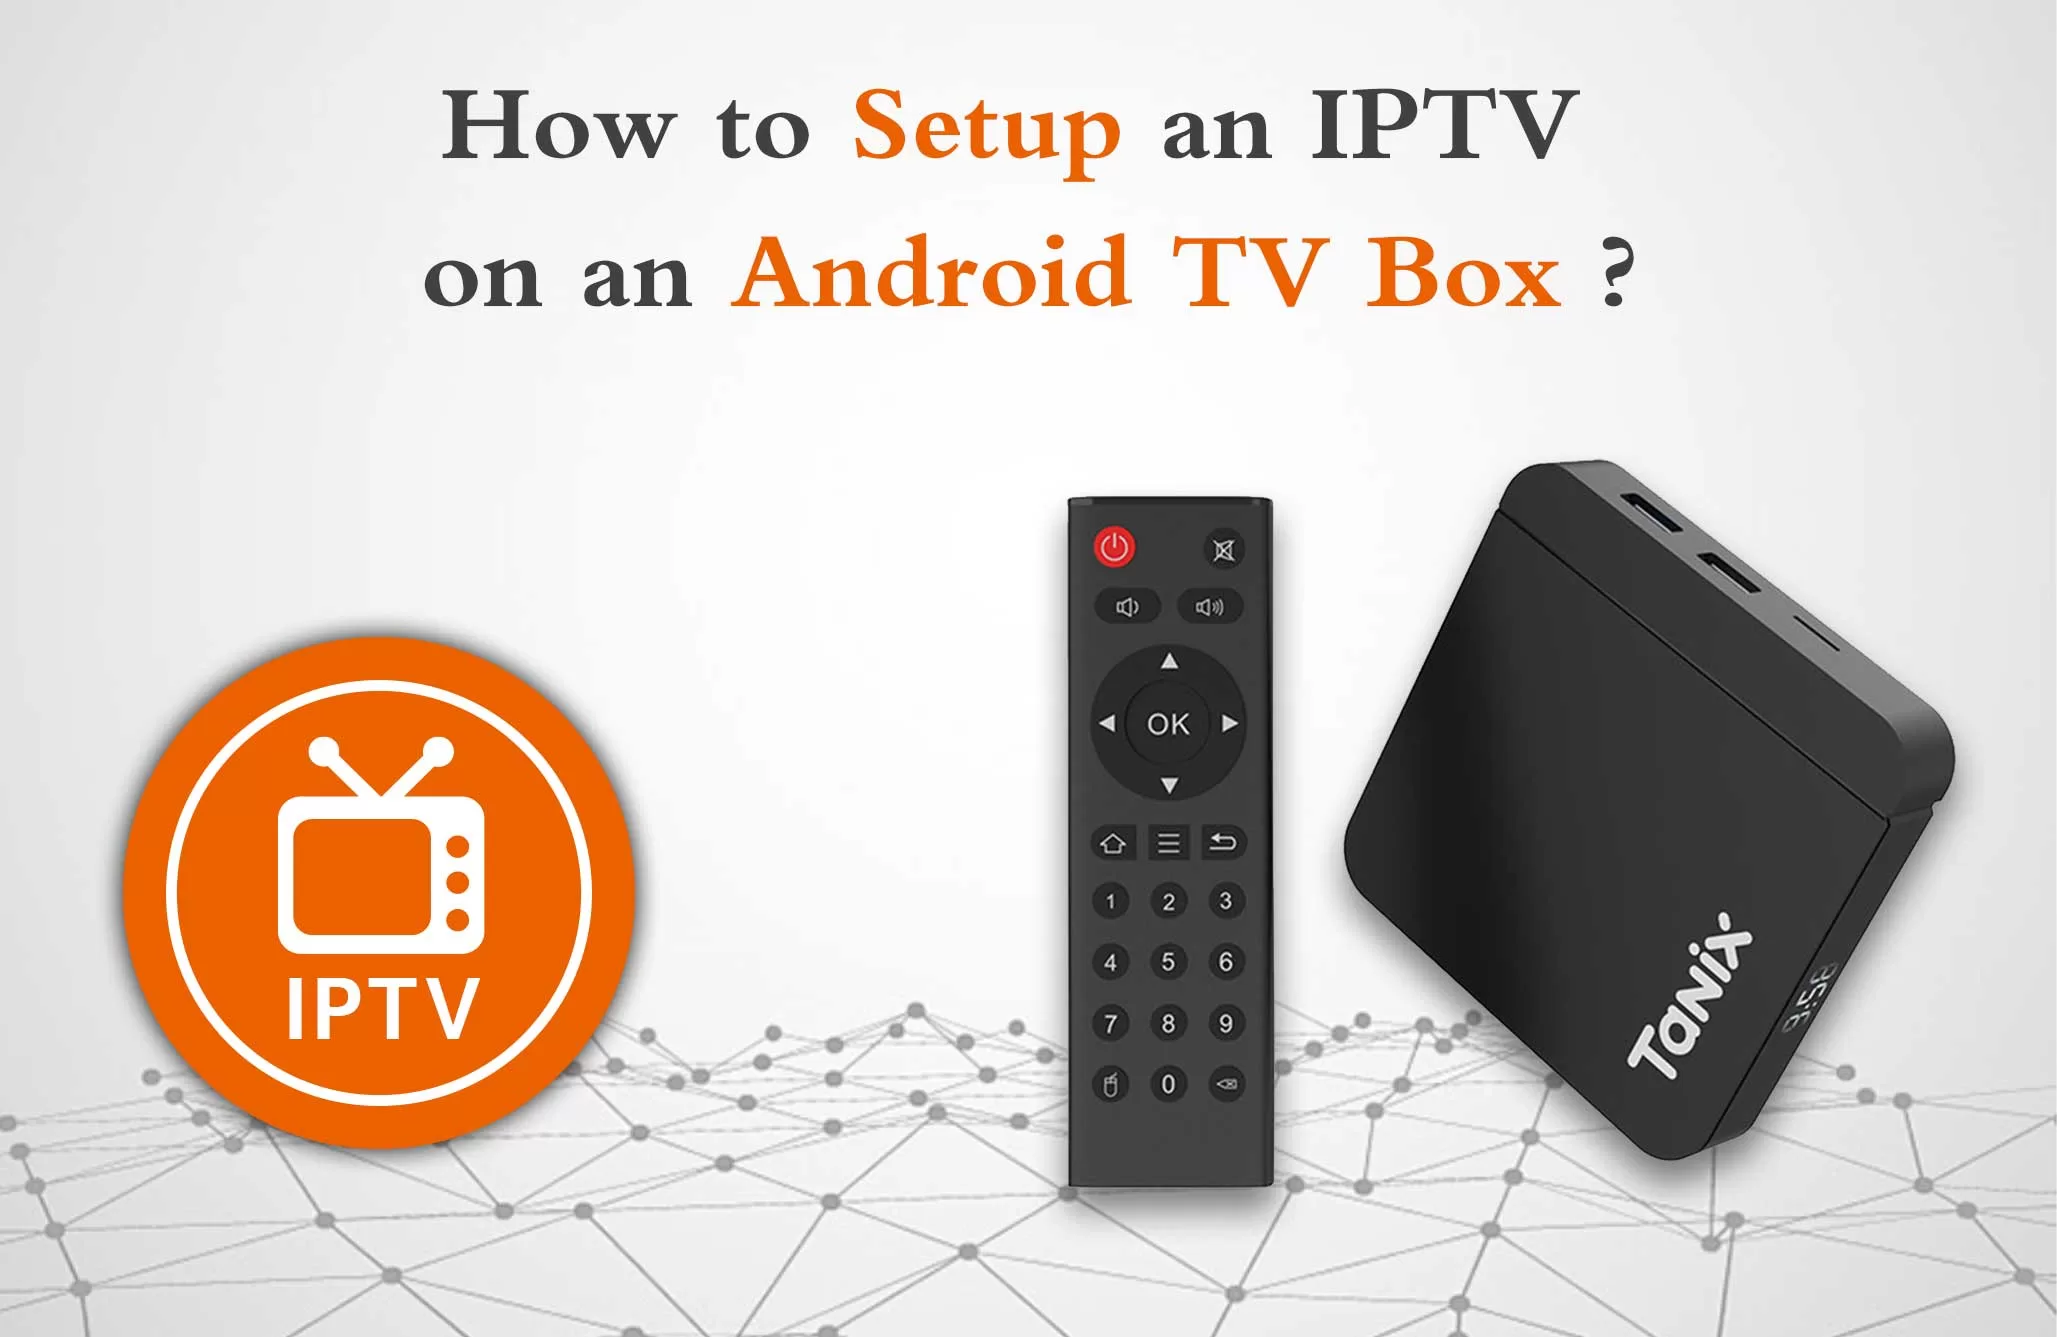 How can I setup an IPTV on an Android TV box